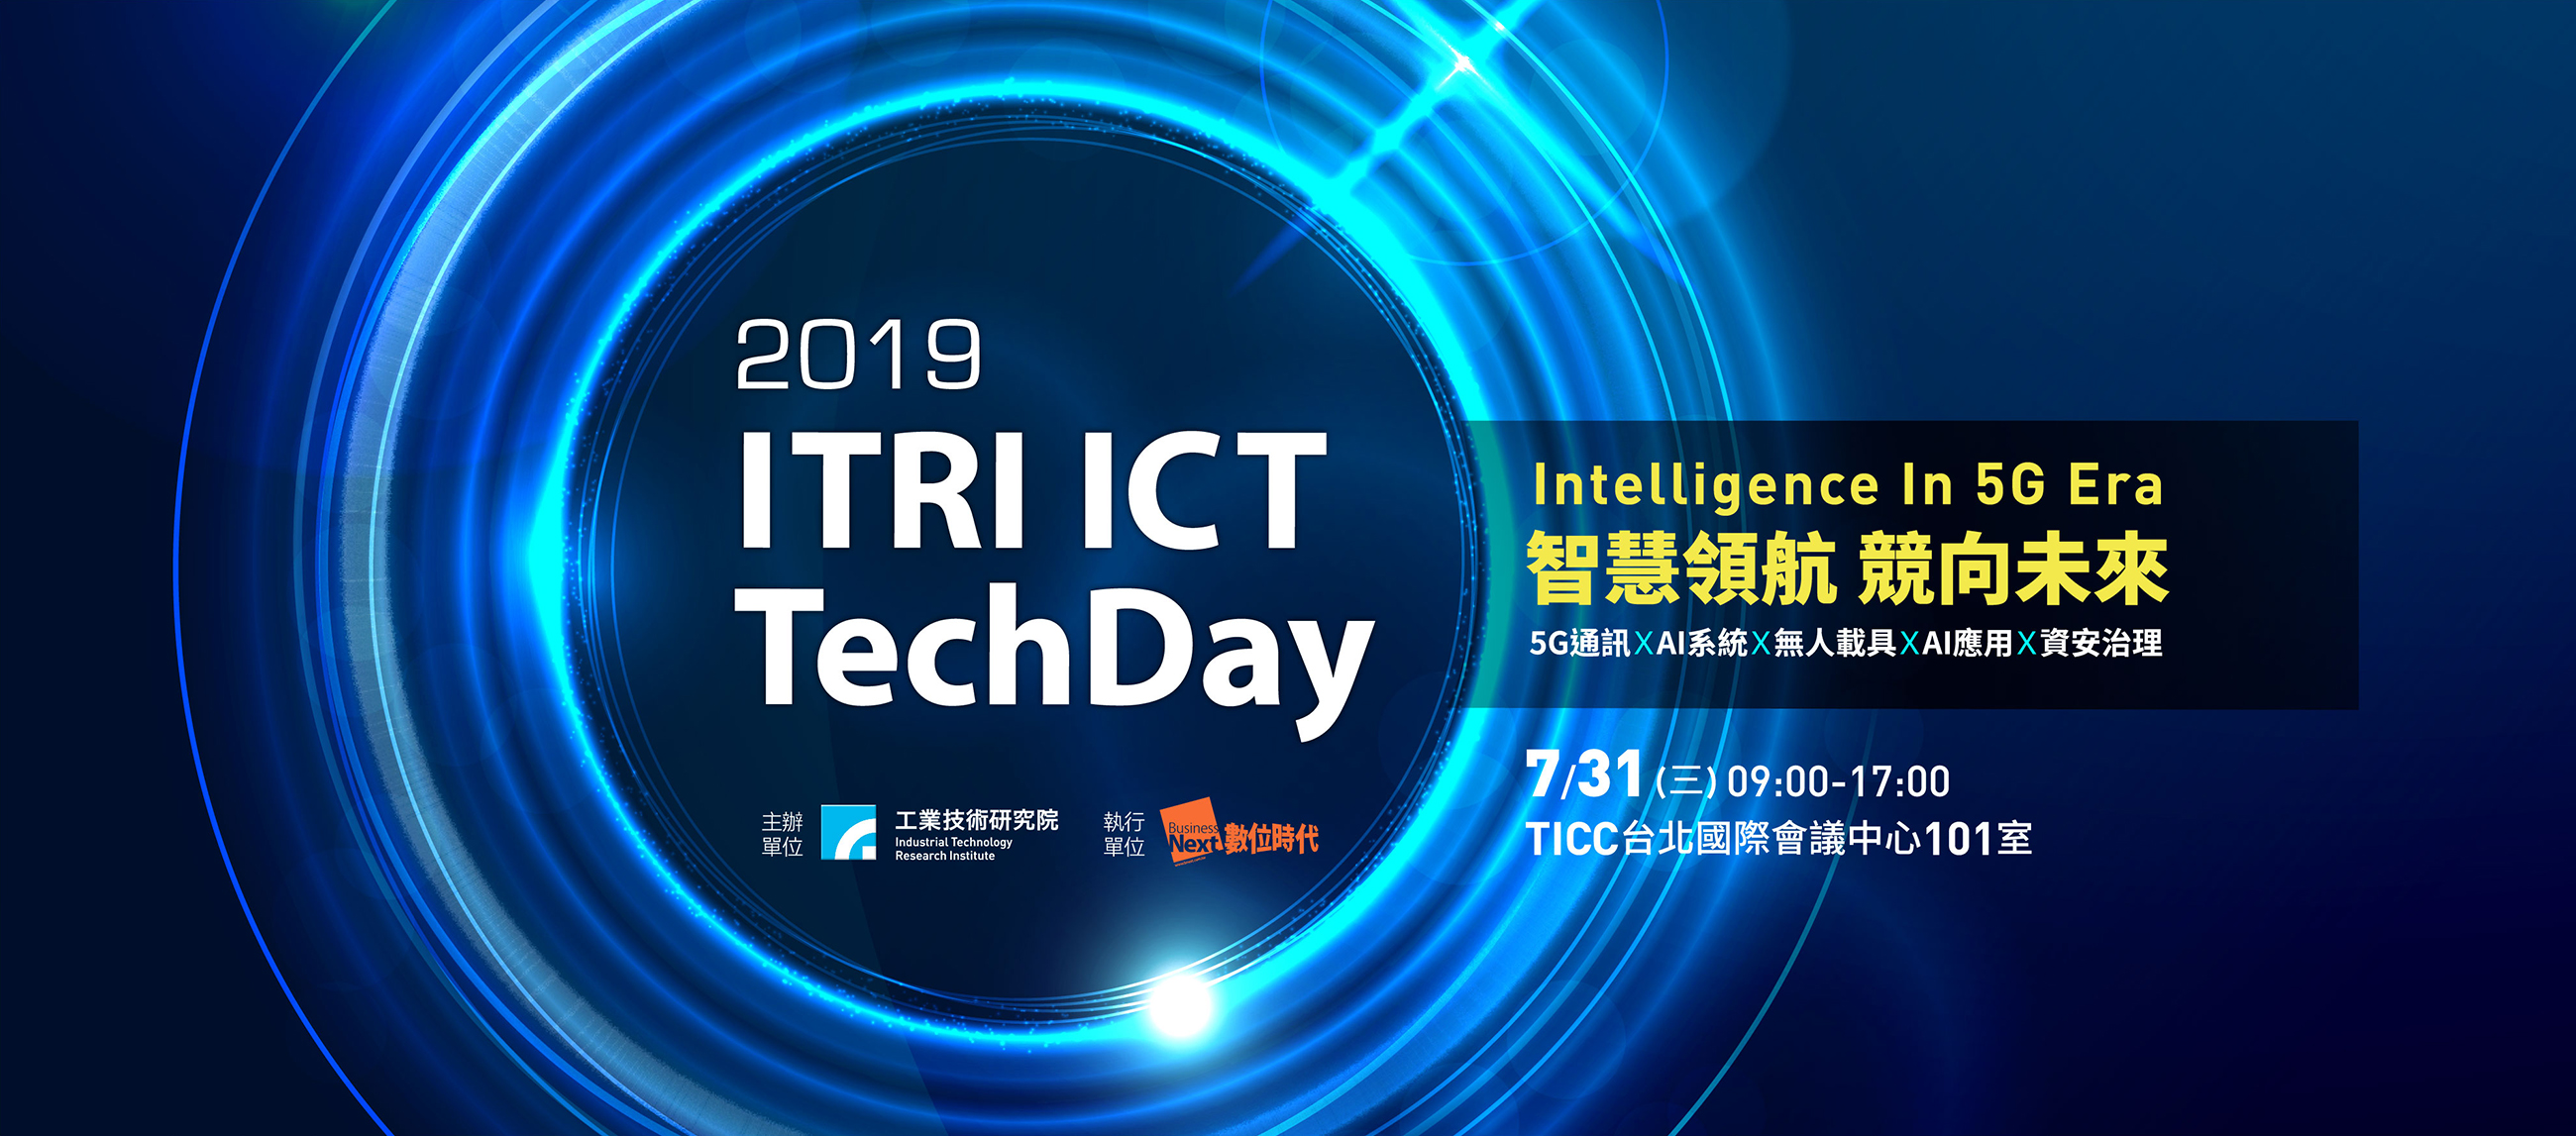 ITRI ICT TechDay